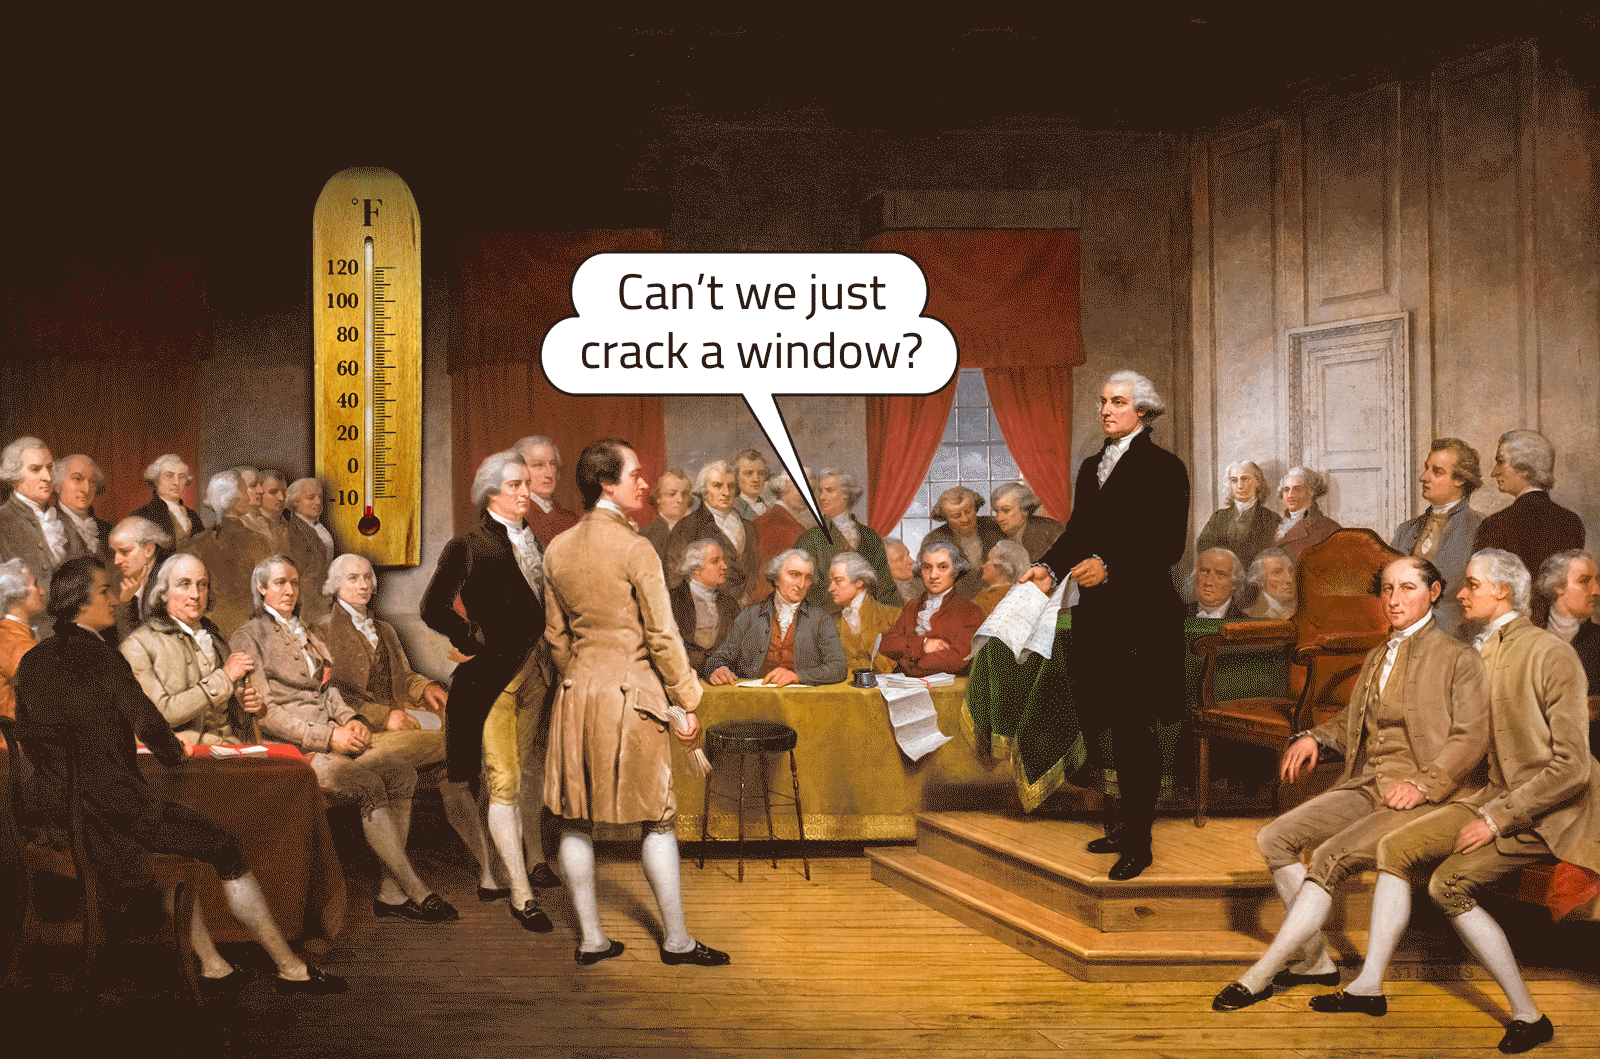 Men in 18th century clothing sit in a room as George Washington stands near the center holding a piece of paper and a thermometer’s mercury rises. A talk bubble shows one man asking another if they can open a window.